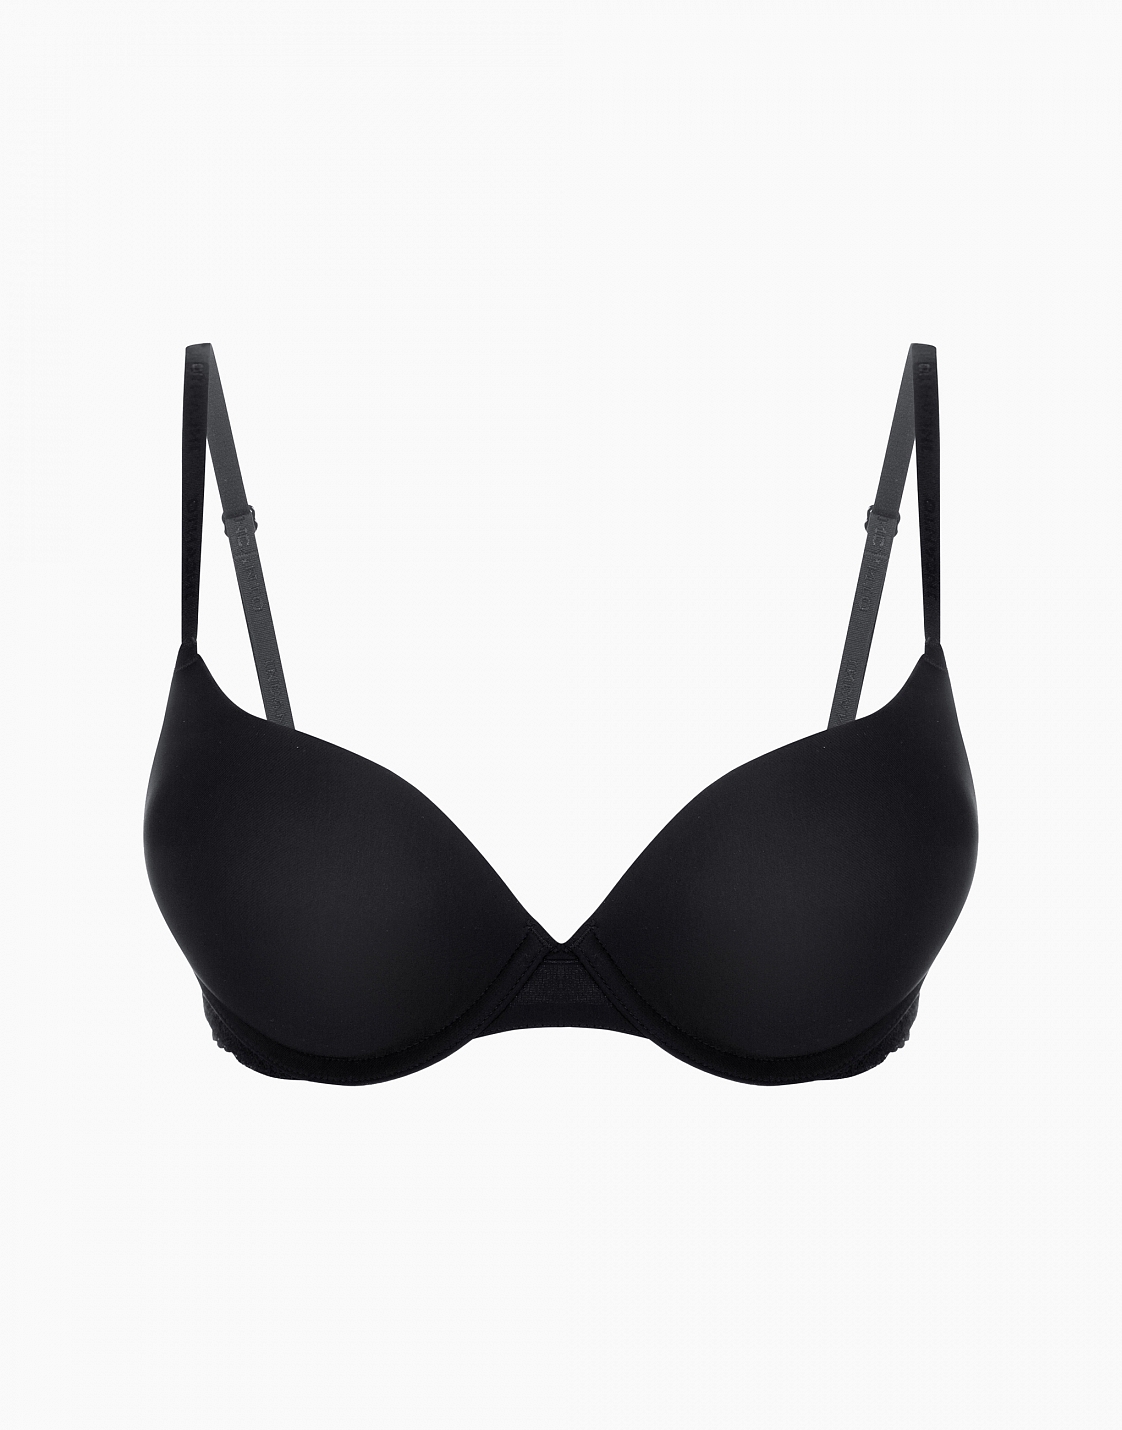 Double push-up bra with molded cups on a thin bridge Inspiration